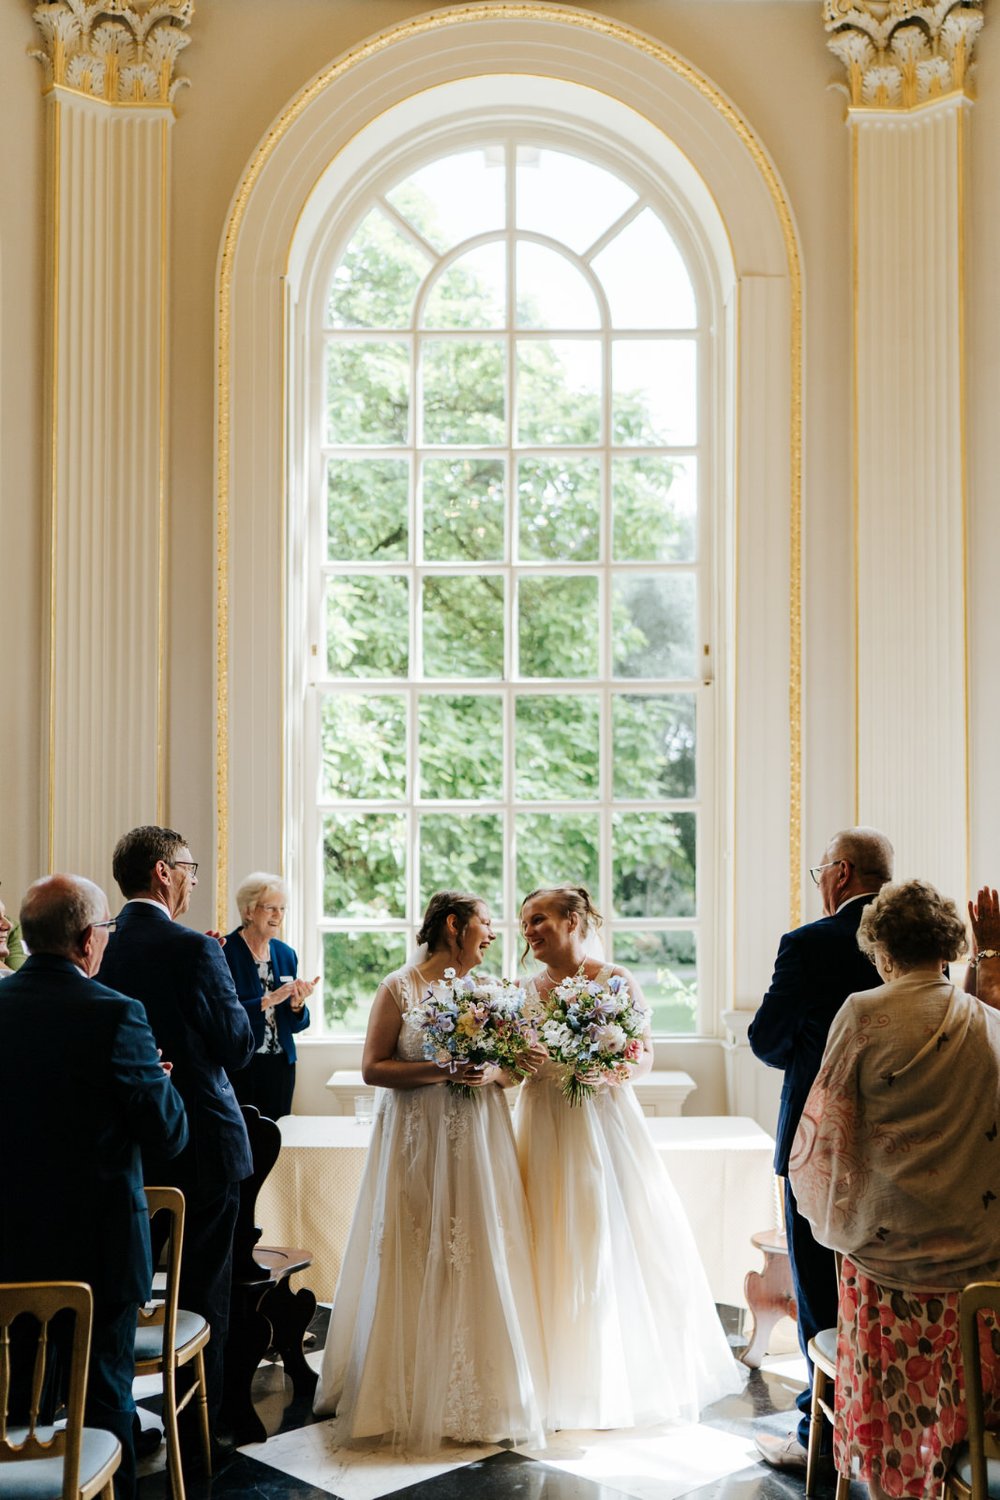 Two brides walk back down the aisle at Orleans House Gallery wedding after their wedding ceremony 